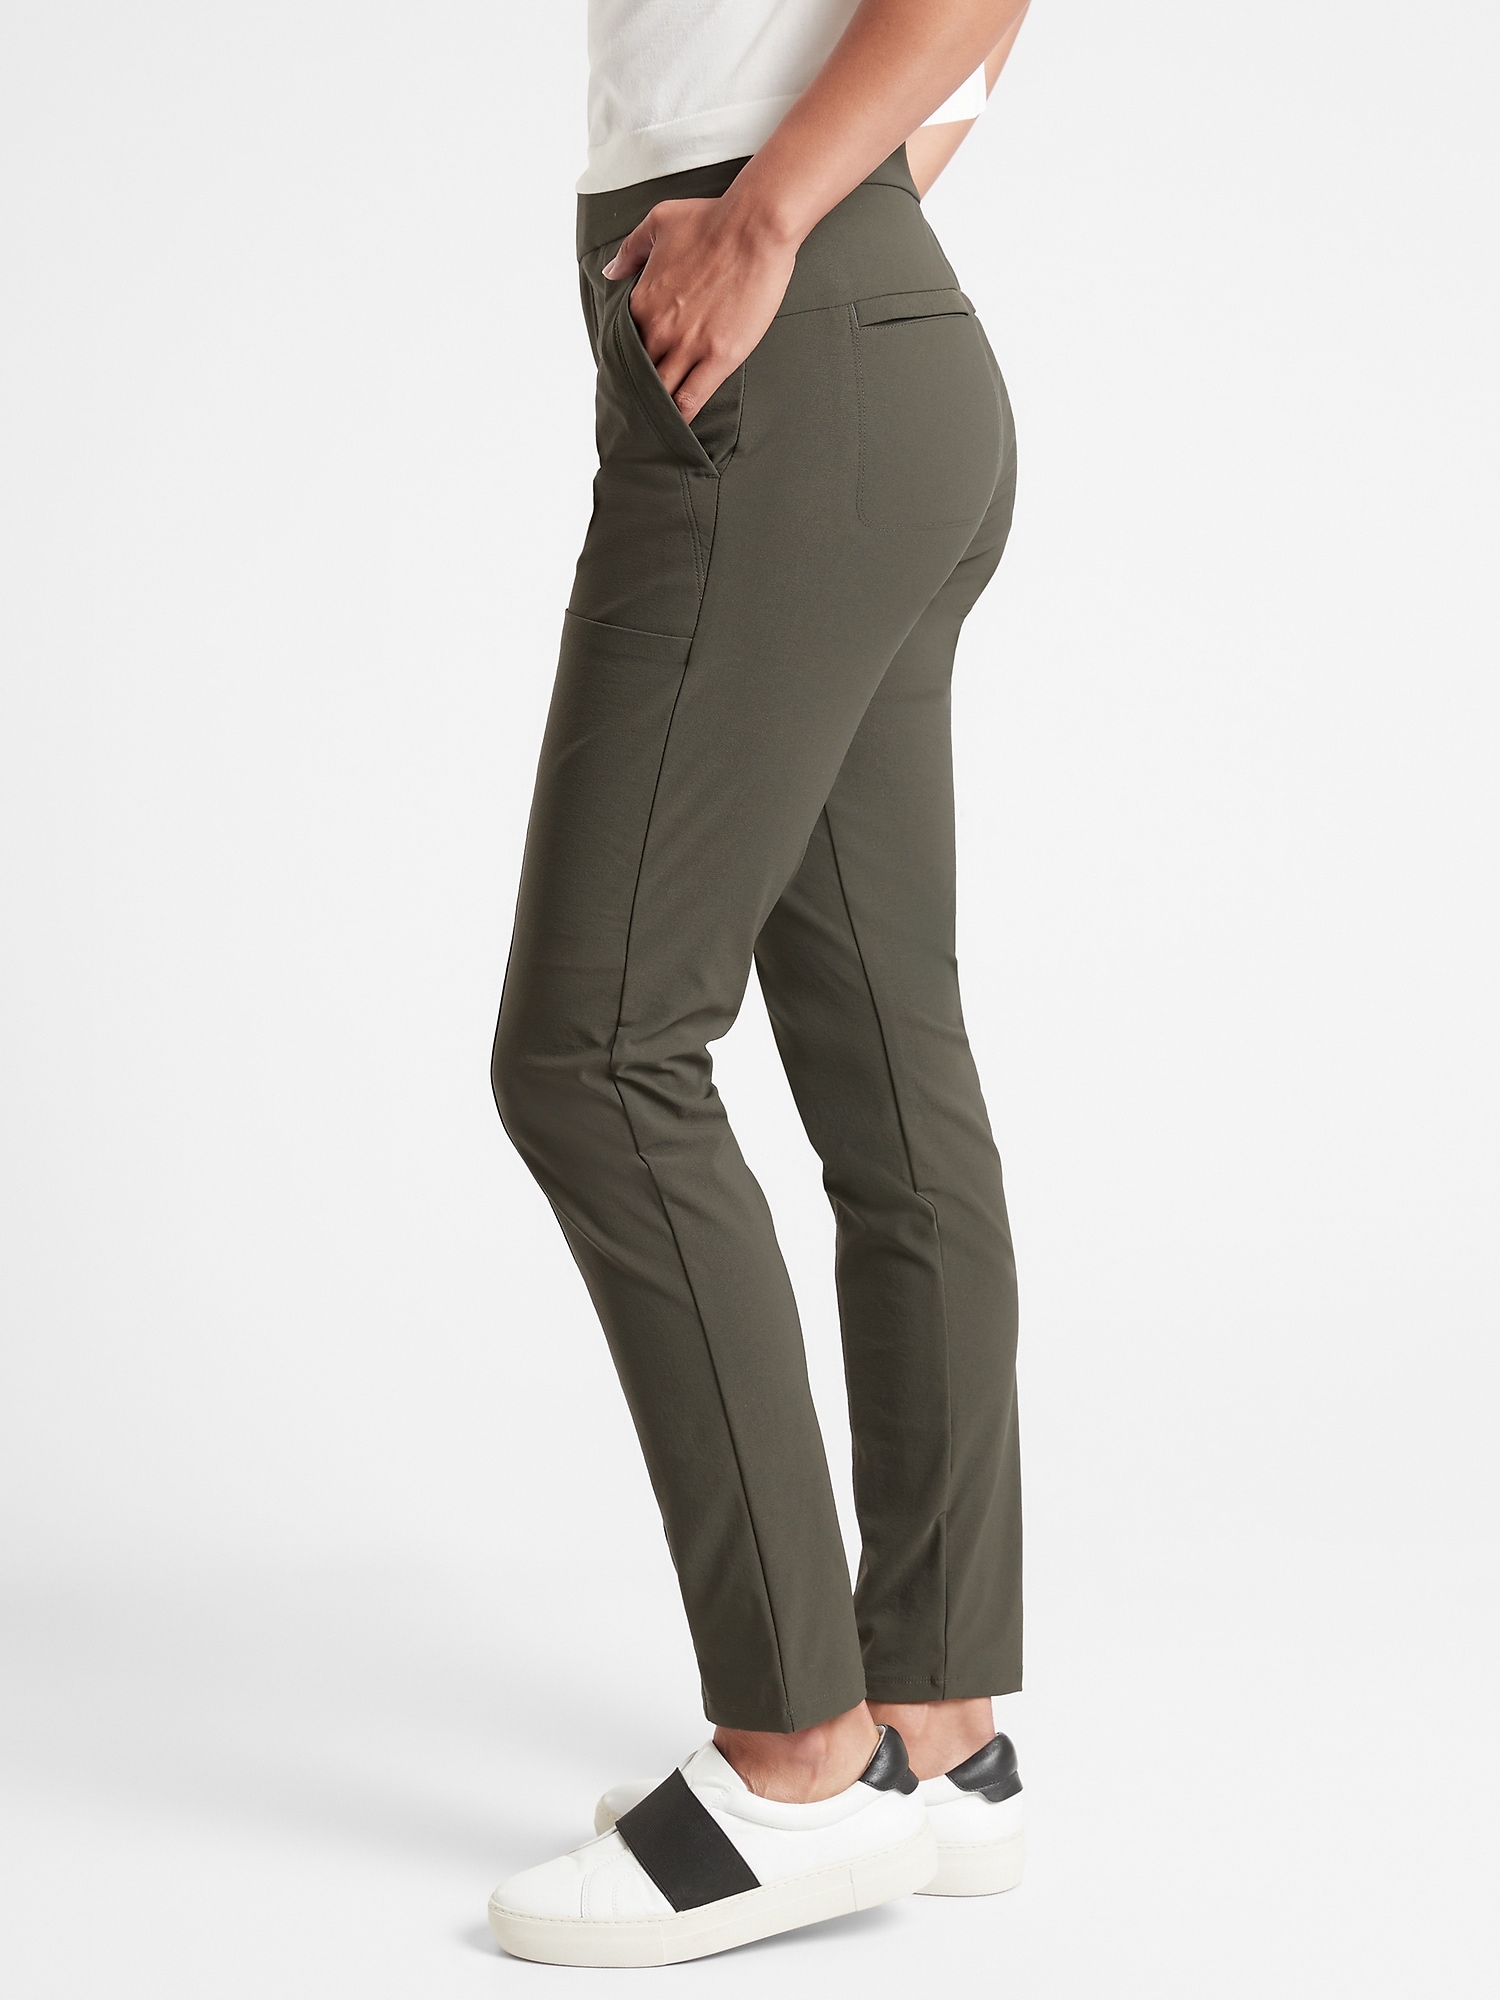 Details about  / ATHLETA WANDER STRAIGHT PANT WORK HIKING $108.00 NWT SIZE 12 TALL #353692